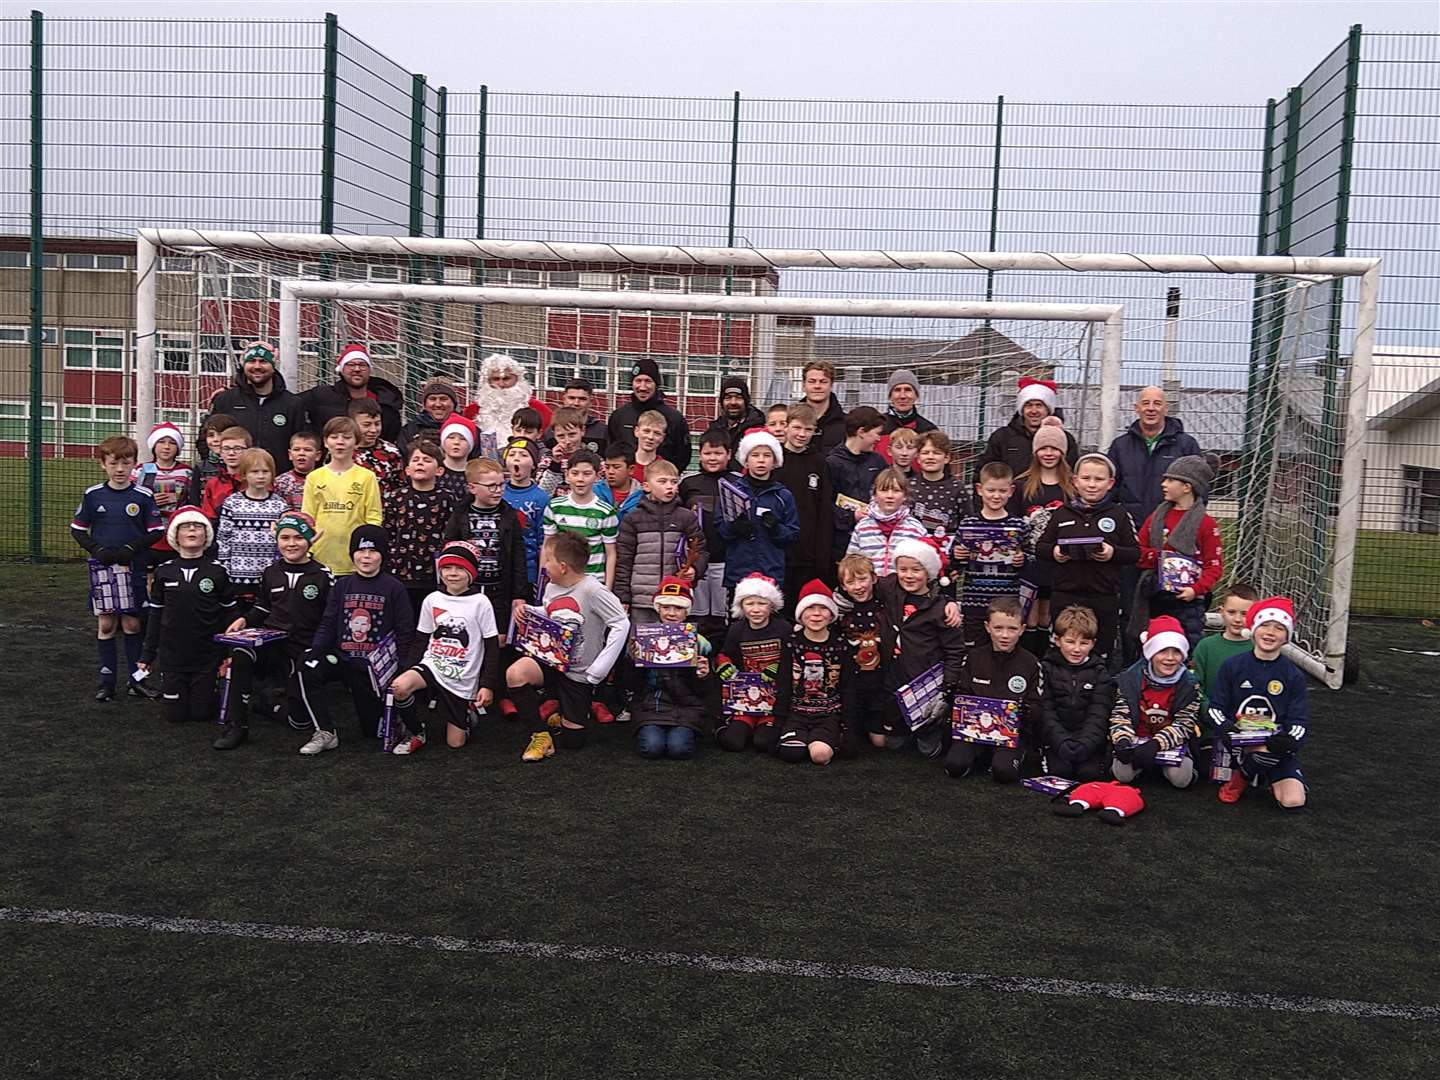 The P4-7 kids with coaches, helpers and, of course, Santa.